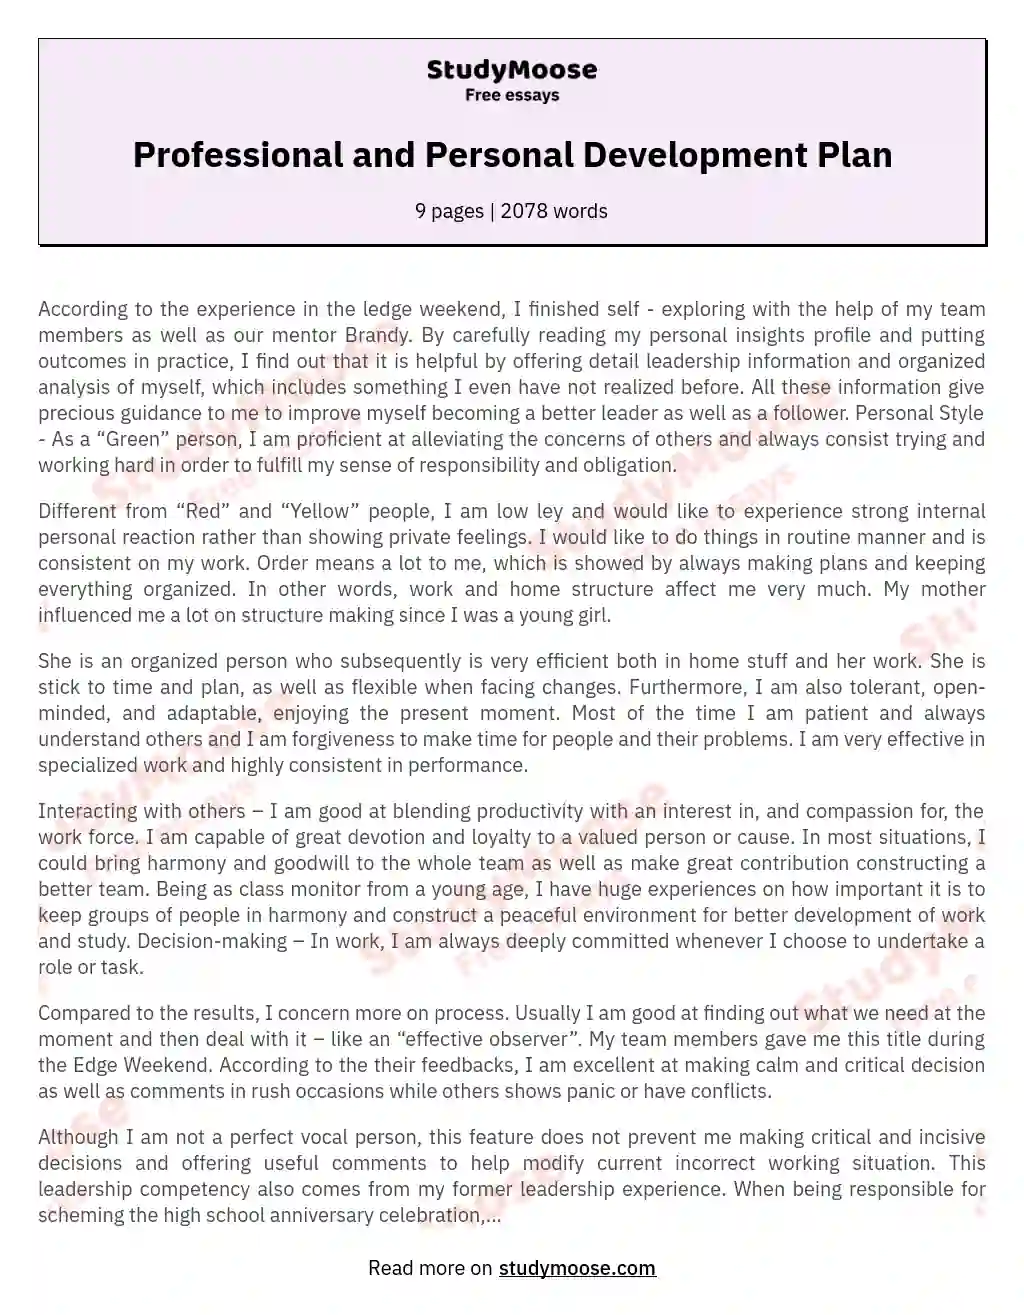 Professional and Personal Development Plan essay